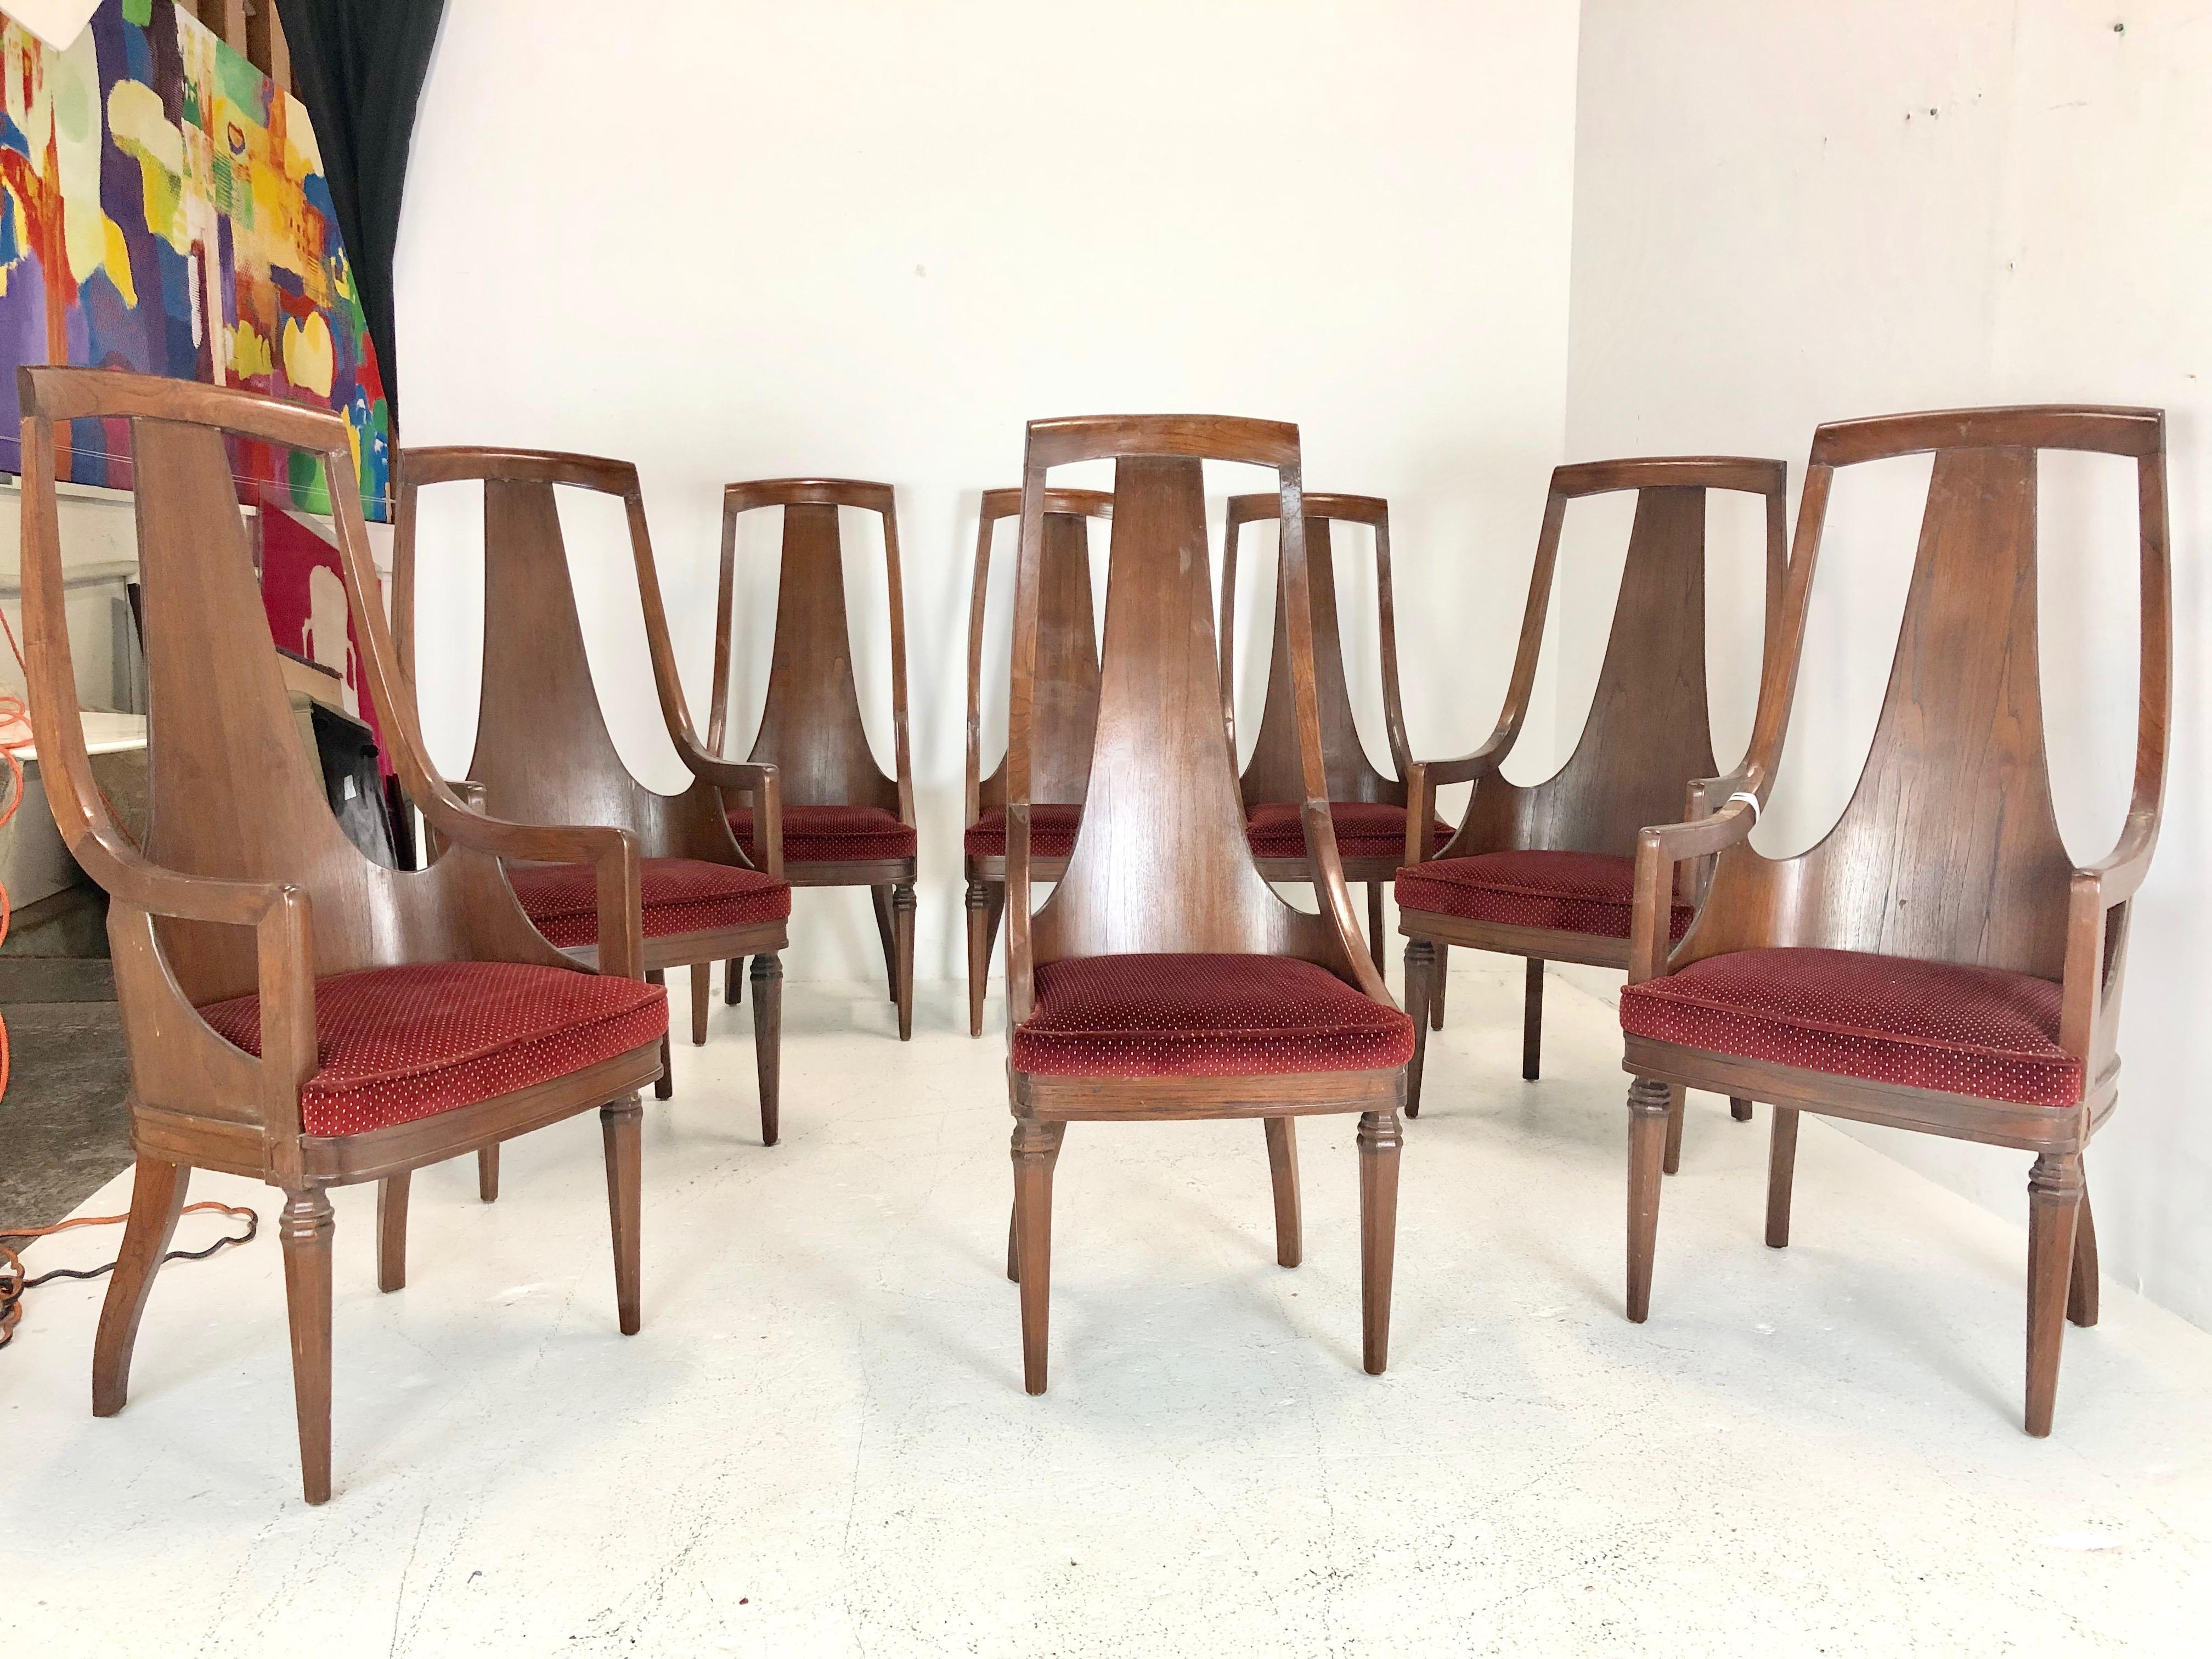 Set of 8 tall back walnut chairs. There are 4 armchairs and 4 side chairs. These chairs have been re-glued and need refinishing.

Dimensions;
Side chairs 19